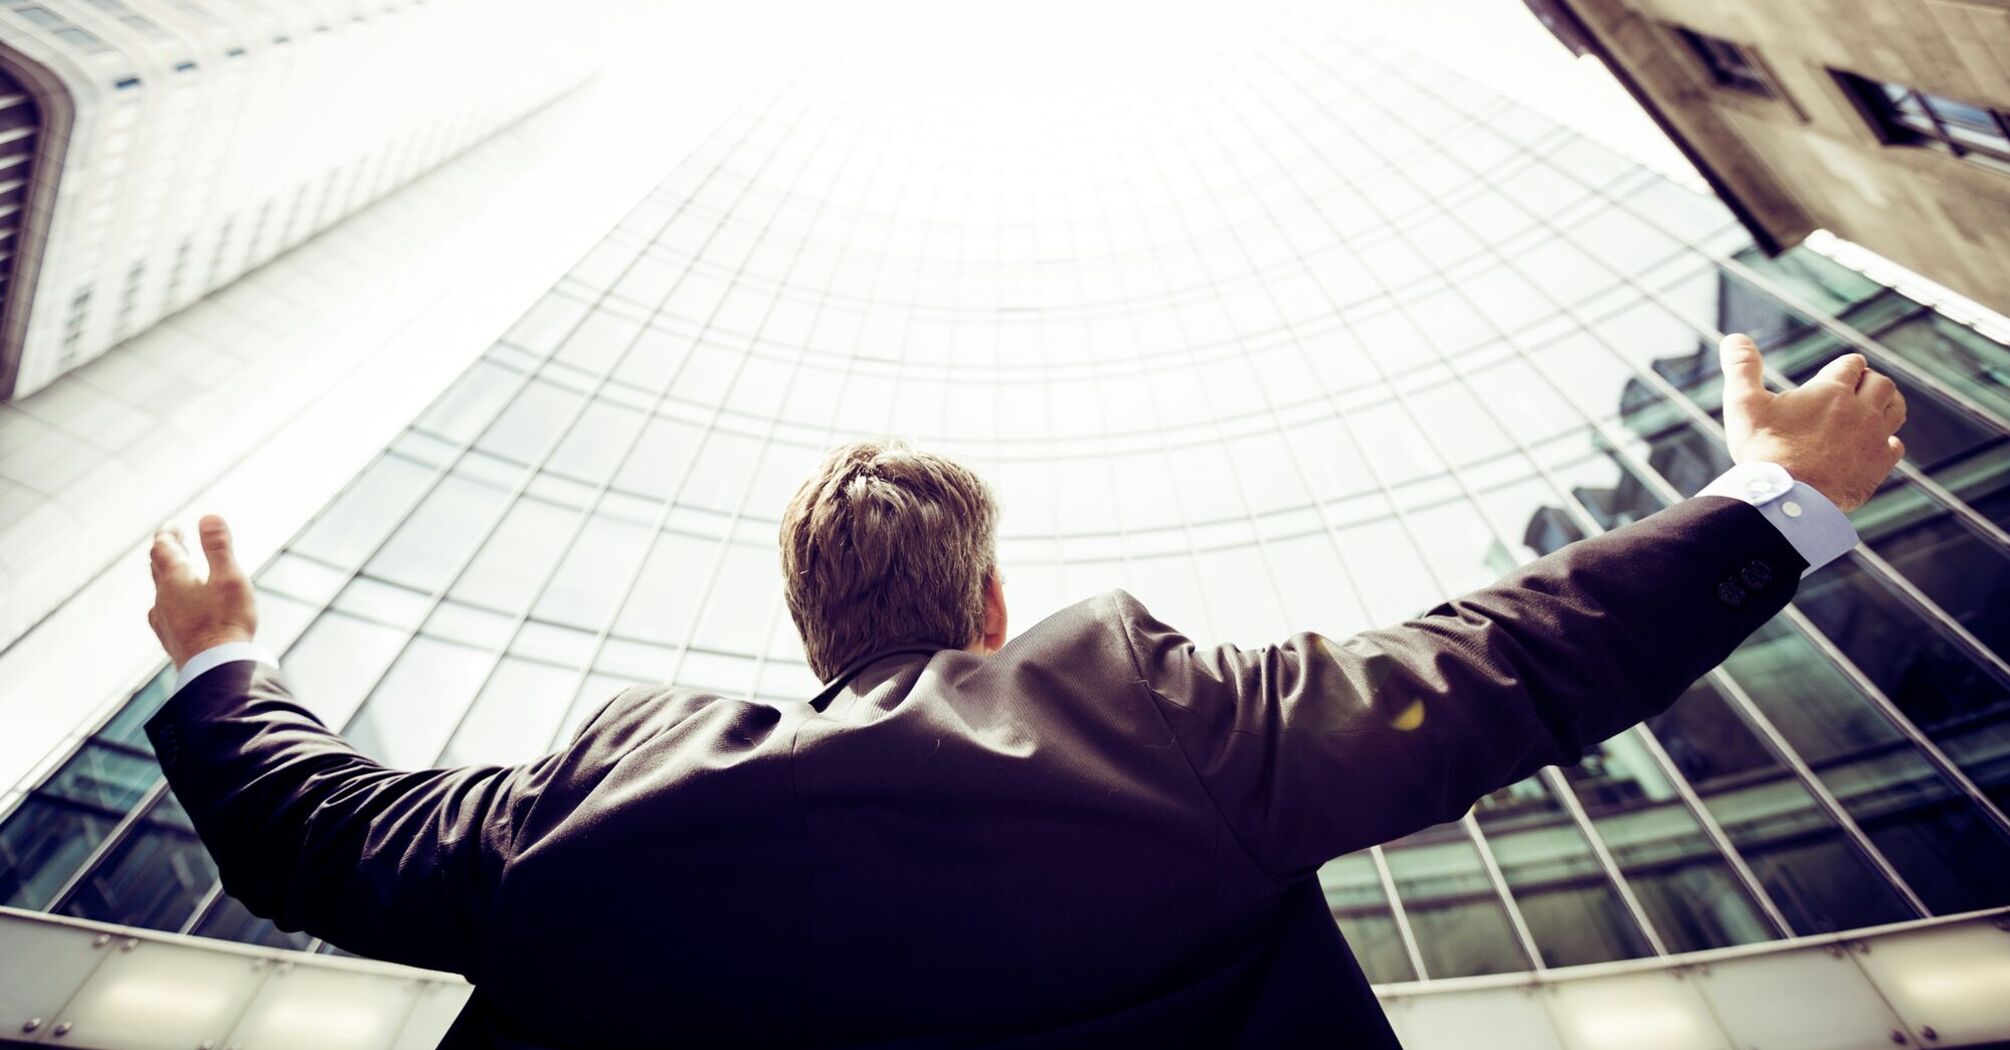 A man with outstretched arms facing a modern glass building, seemingly in a gesture of success or aspiration